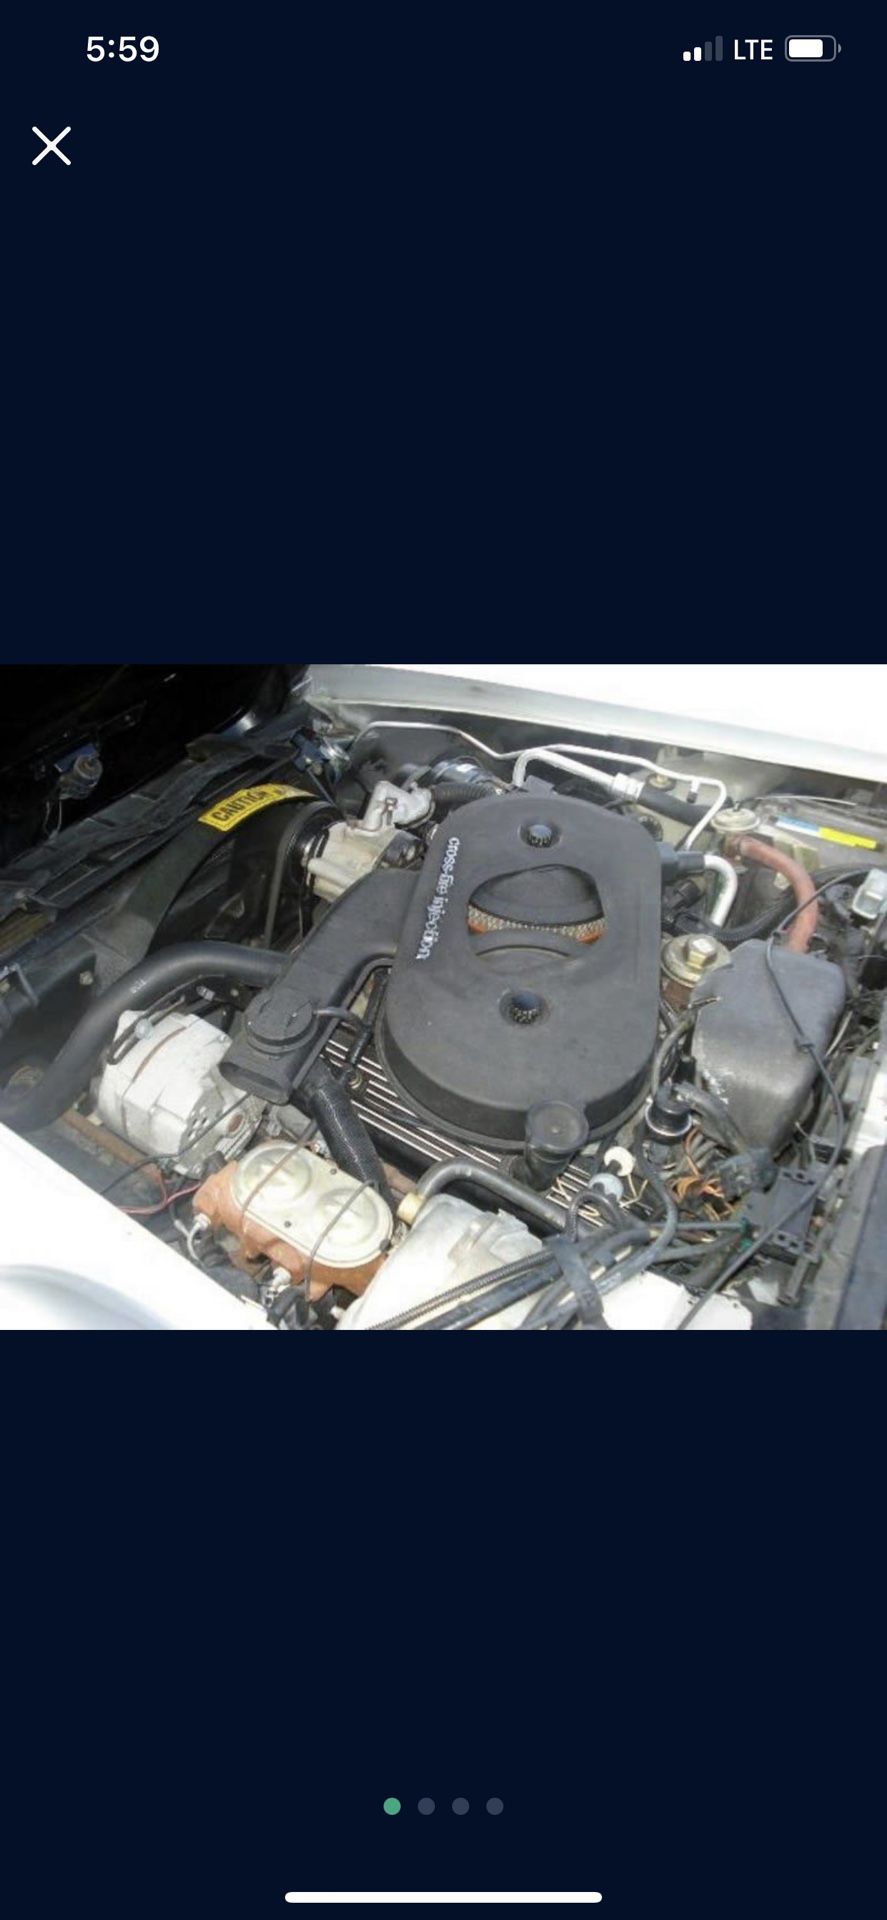 Complete engine 1982 Corvette With 89,000 Miles